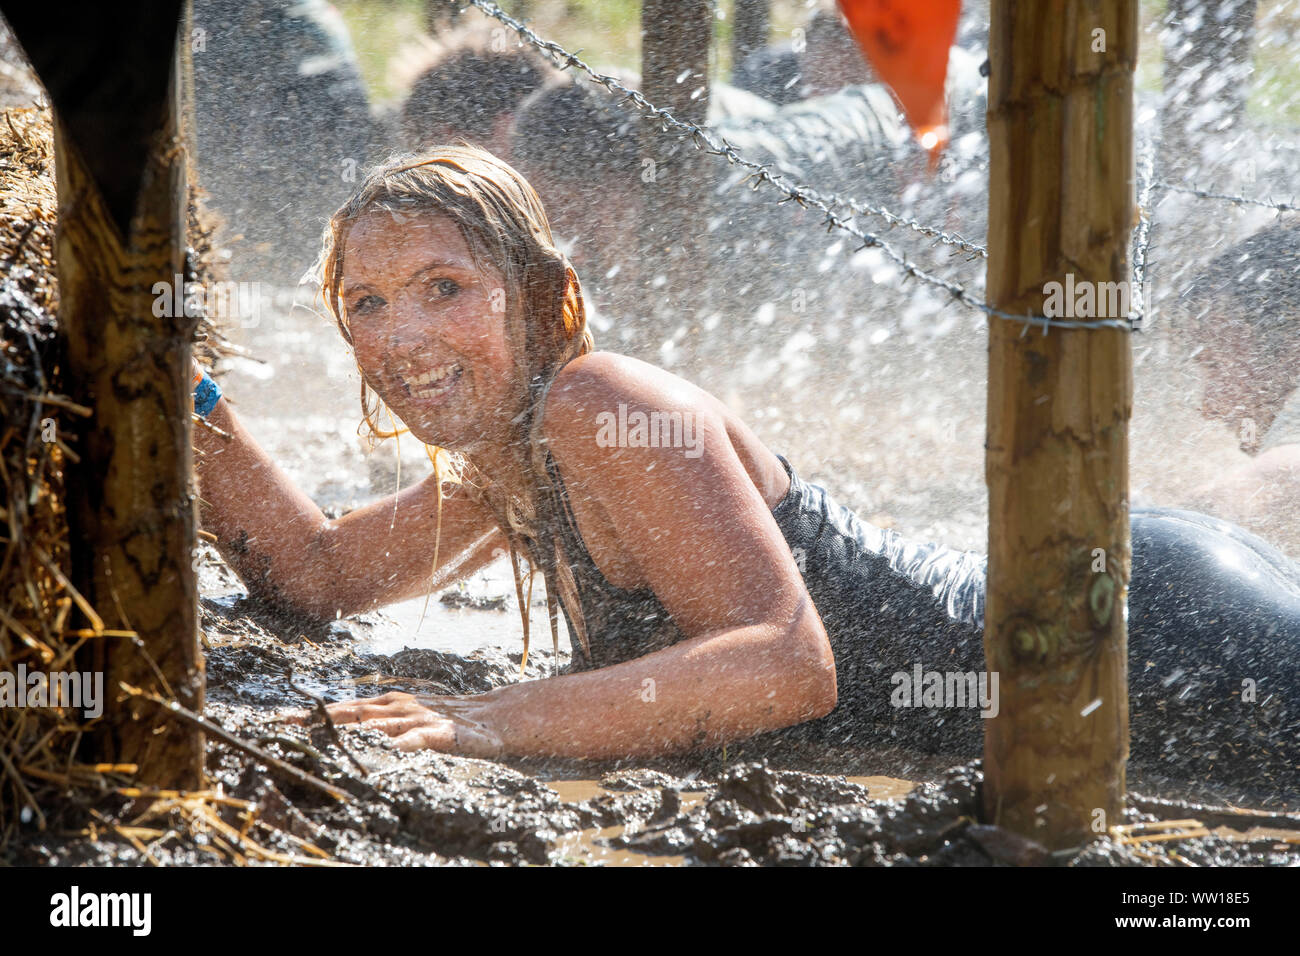 A competitor on the ‘Get Low’ obstacle at the Tough Mudder endurance event in Badminton Park, Gloucestershire UK Stock Photo